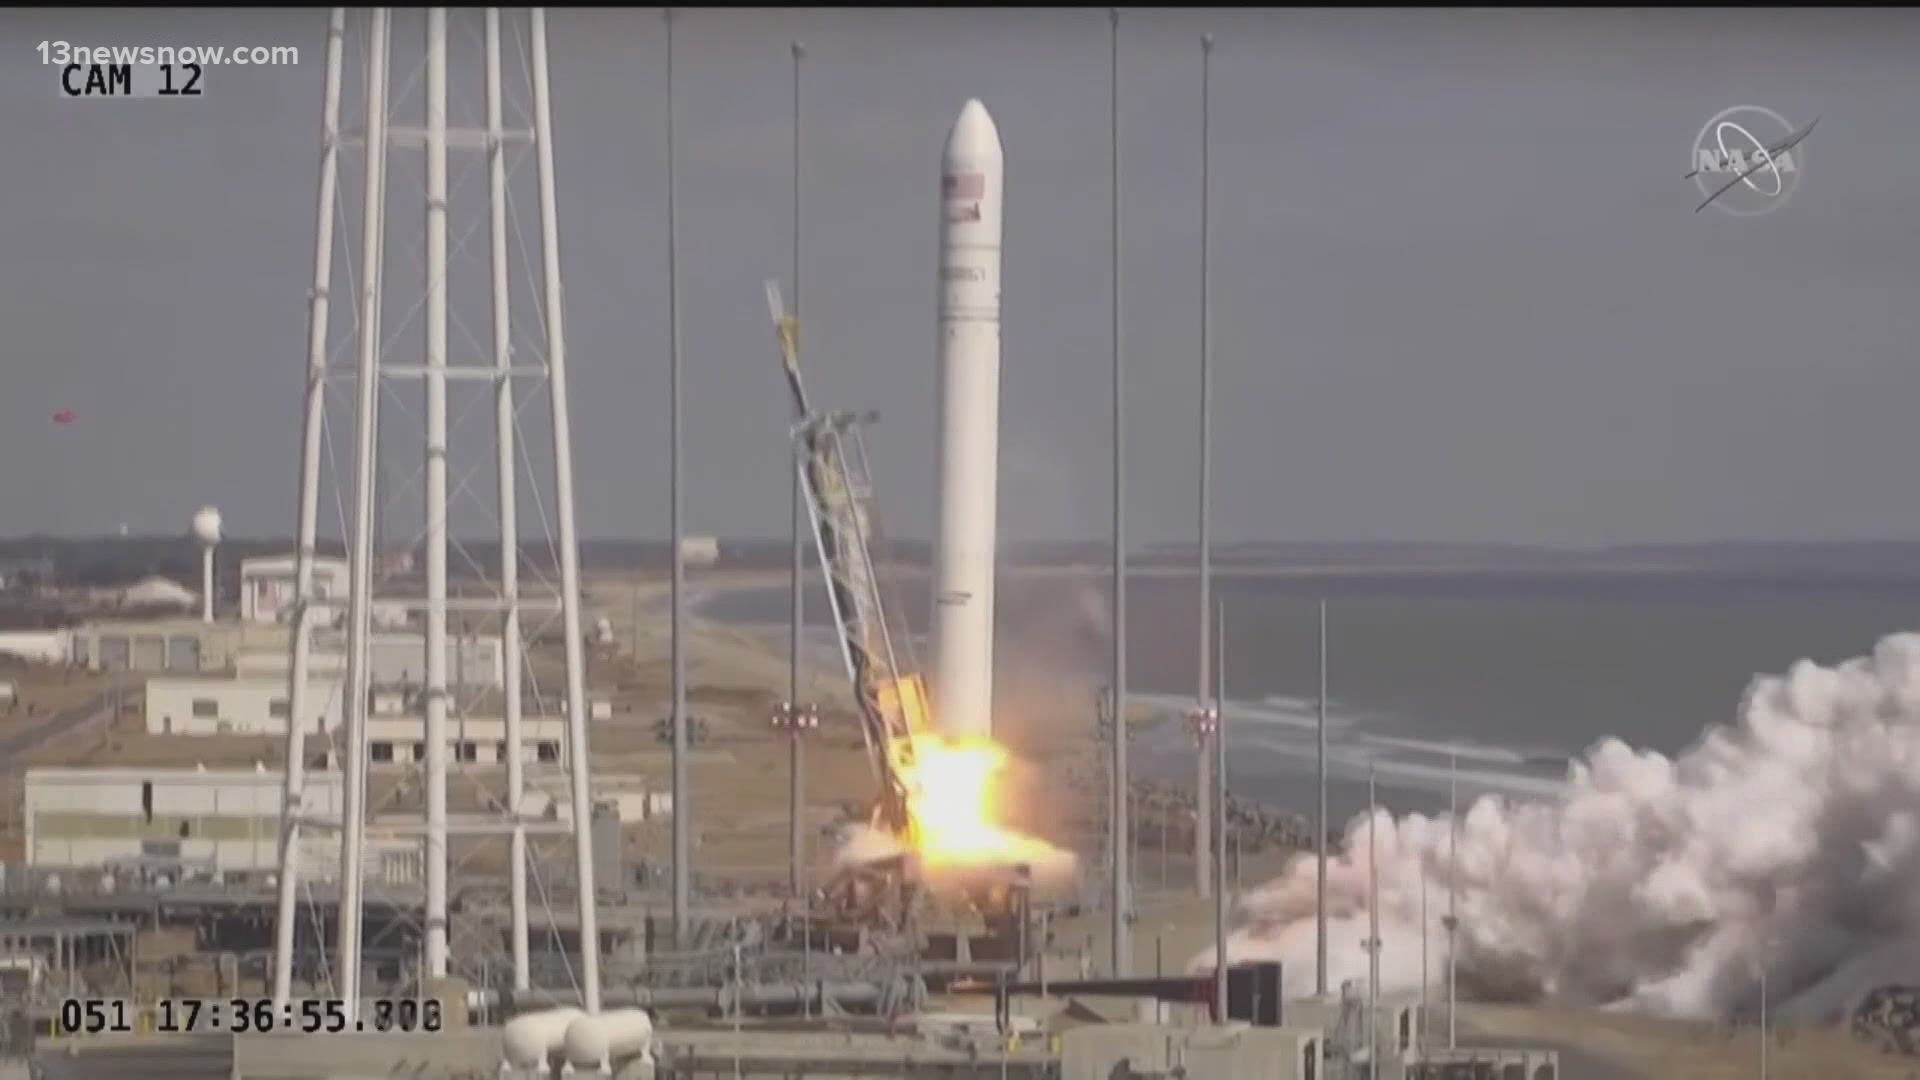 Lawmakers heard testimony that China and Russia are already enhancing their space capabilities.